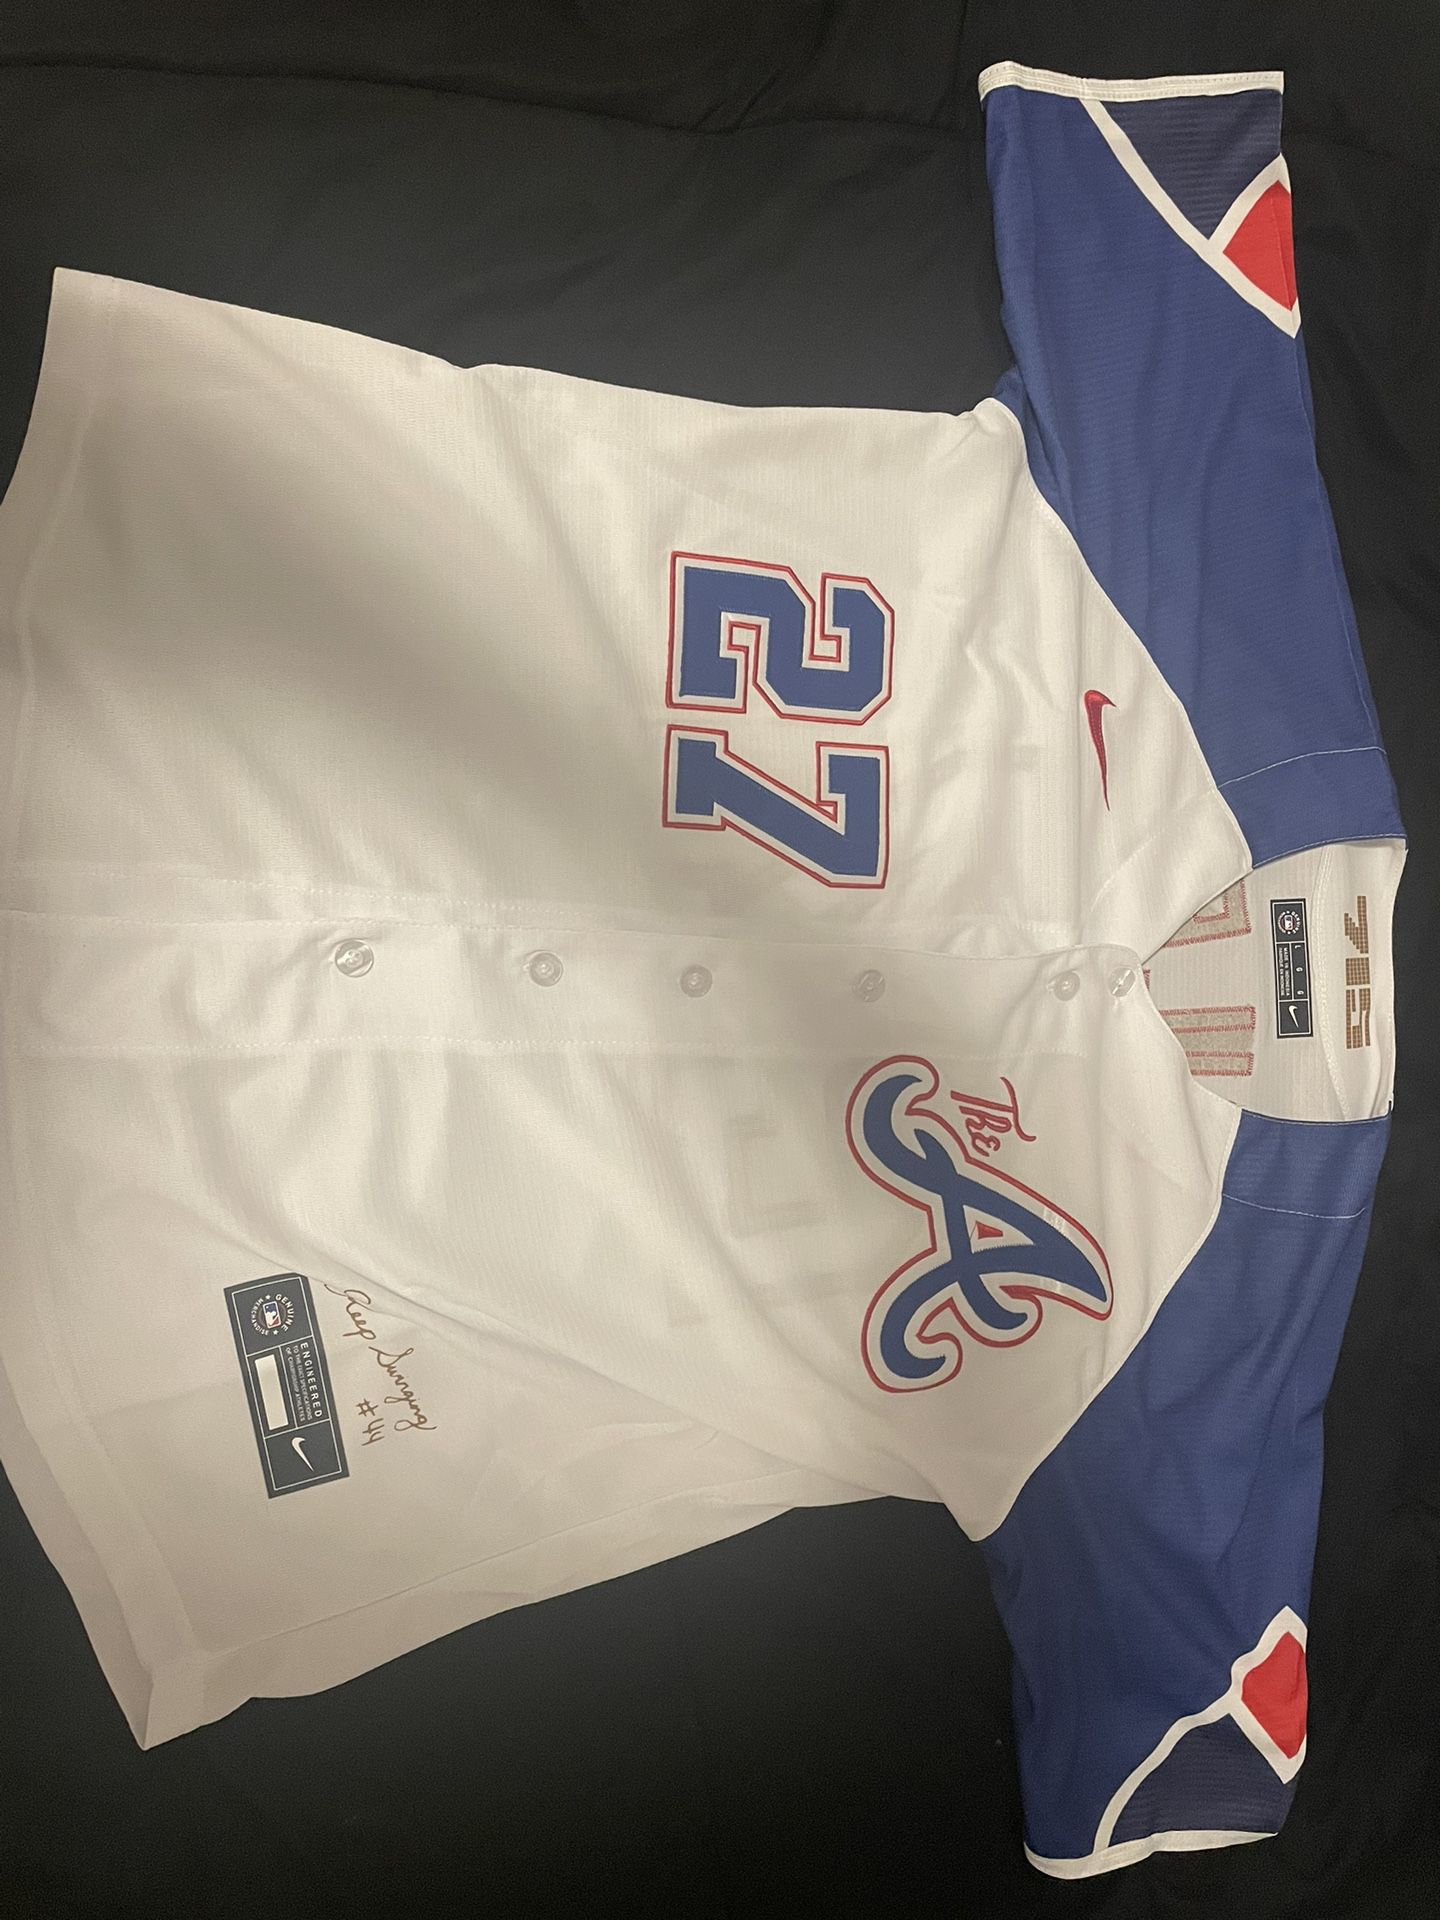 Atlanta Braves Jersey for Sale in Athens, GA - OfferUp